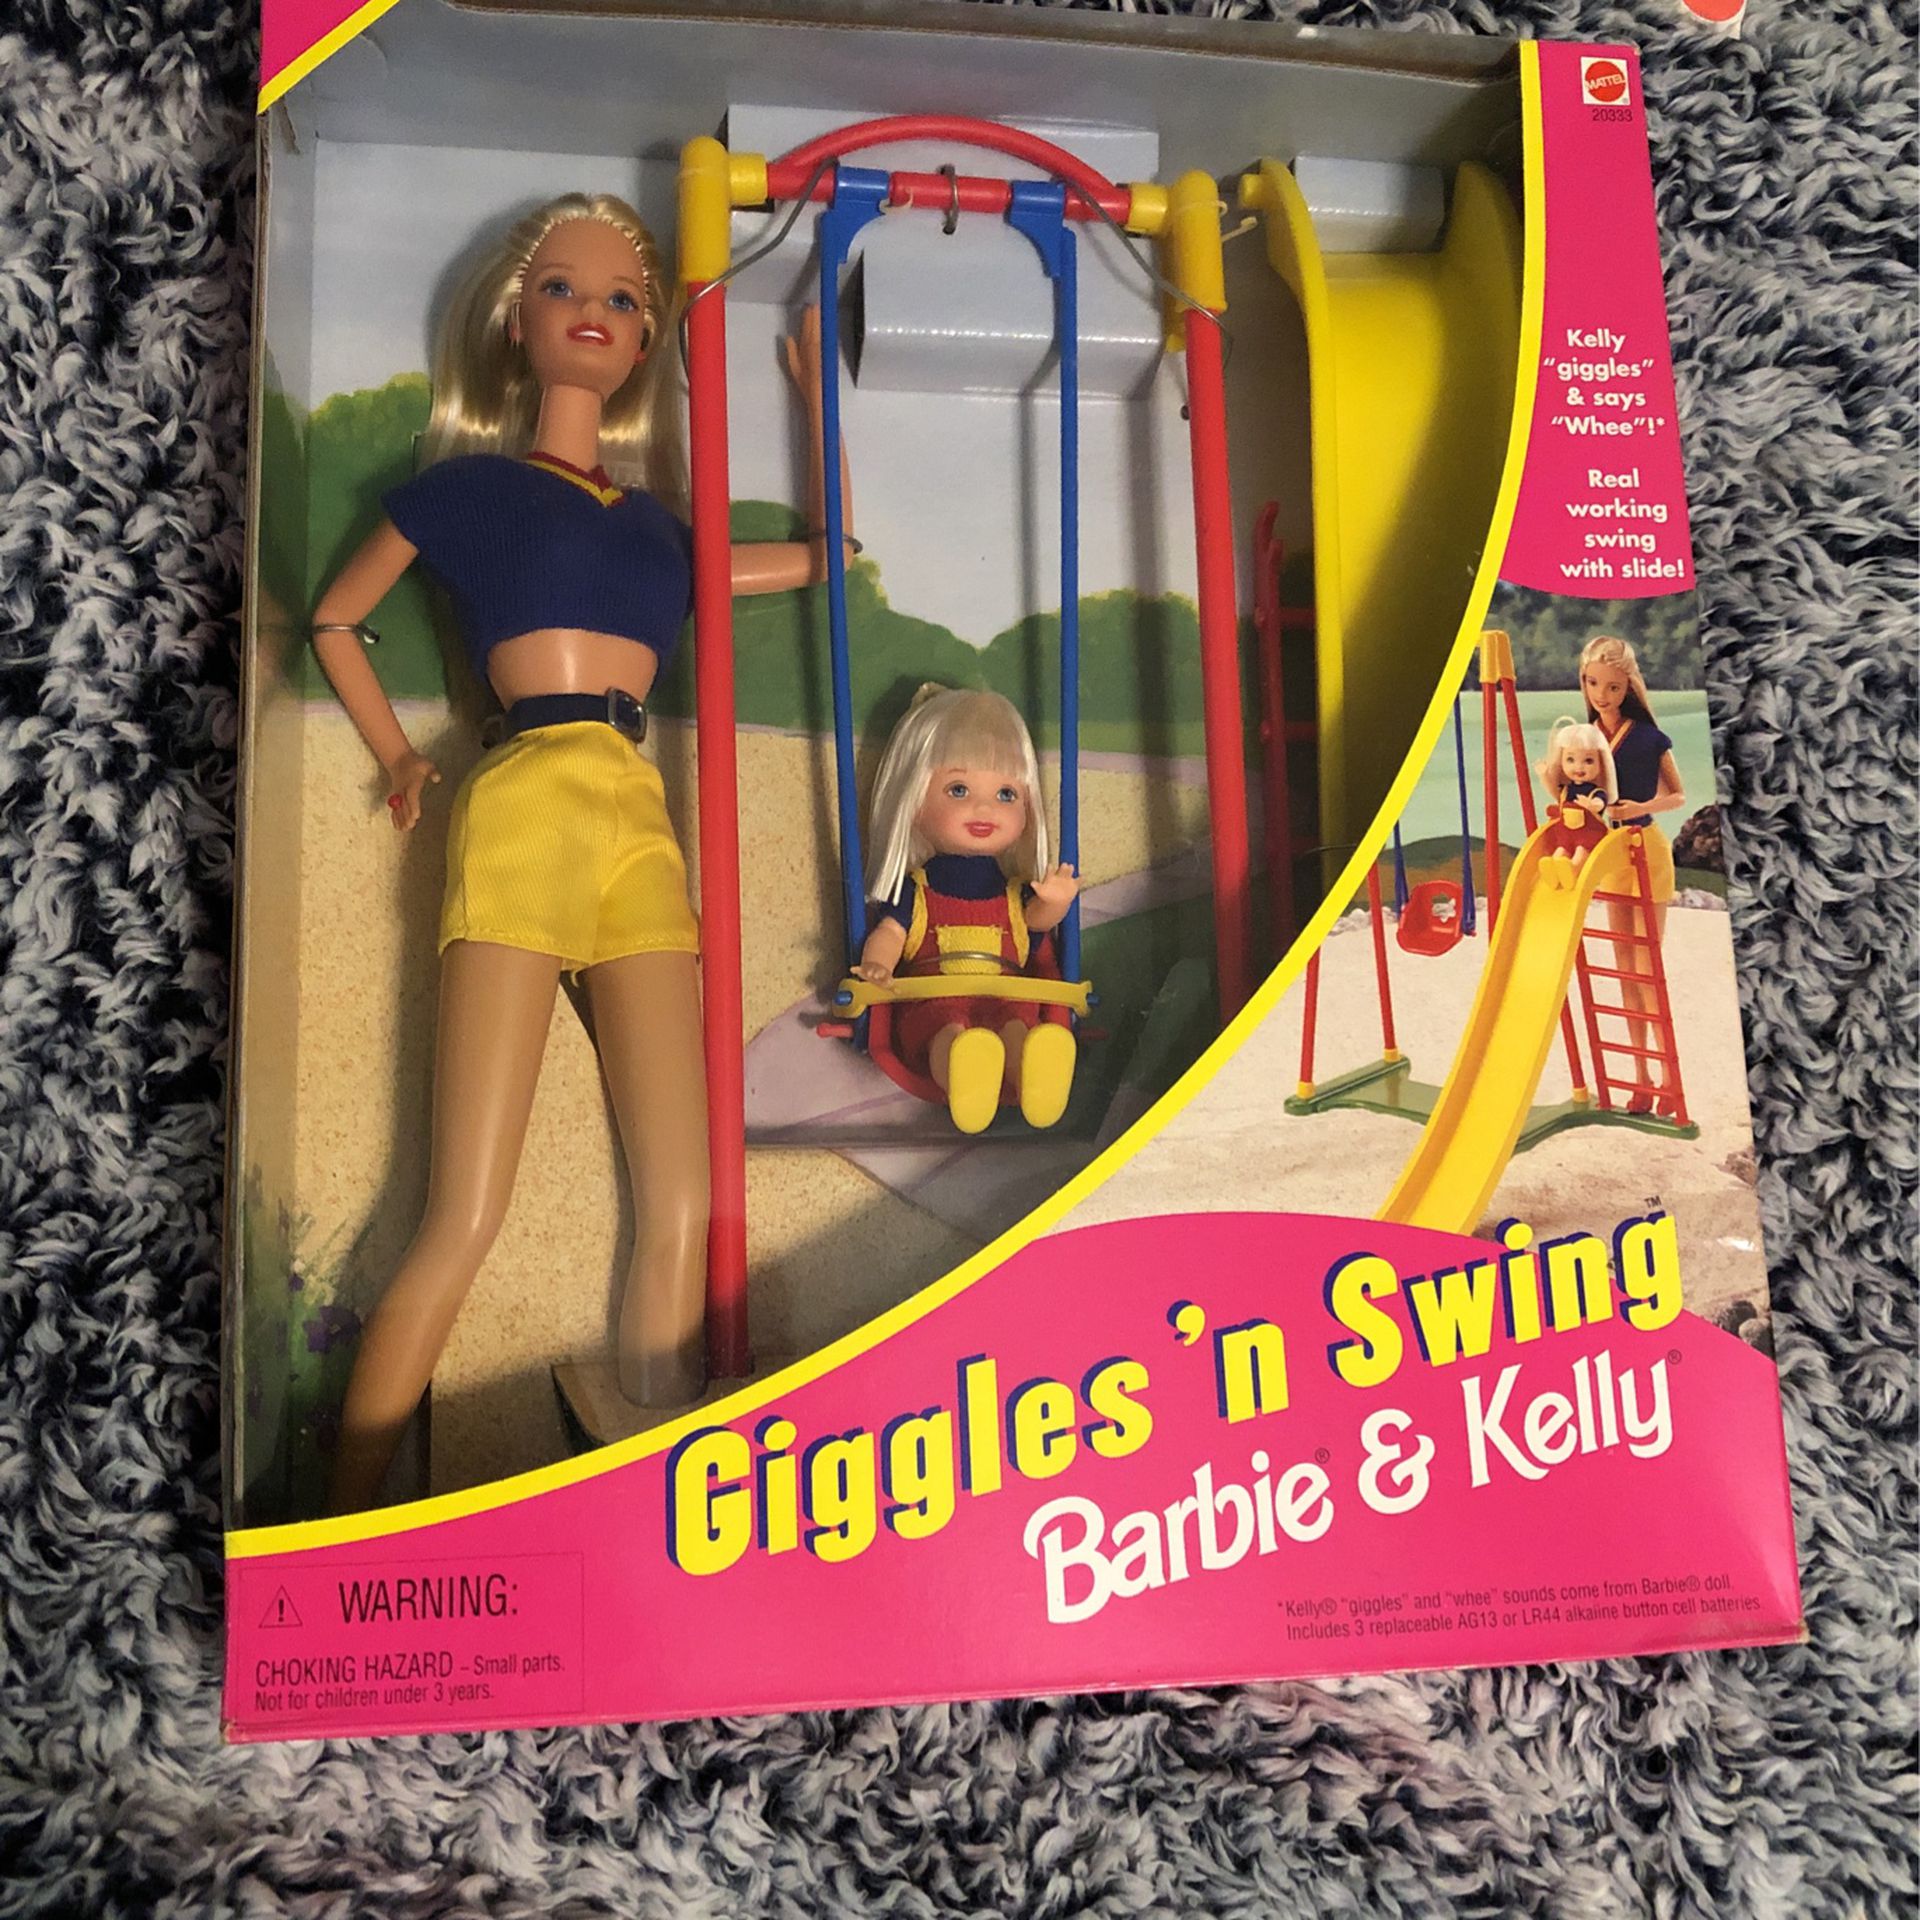 Barbie and Kelly giggles and swing set